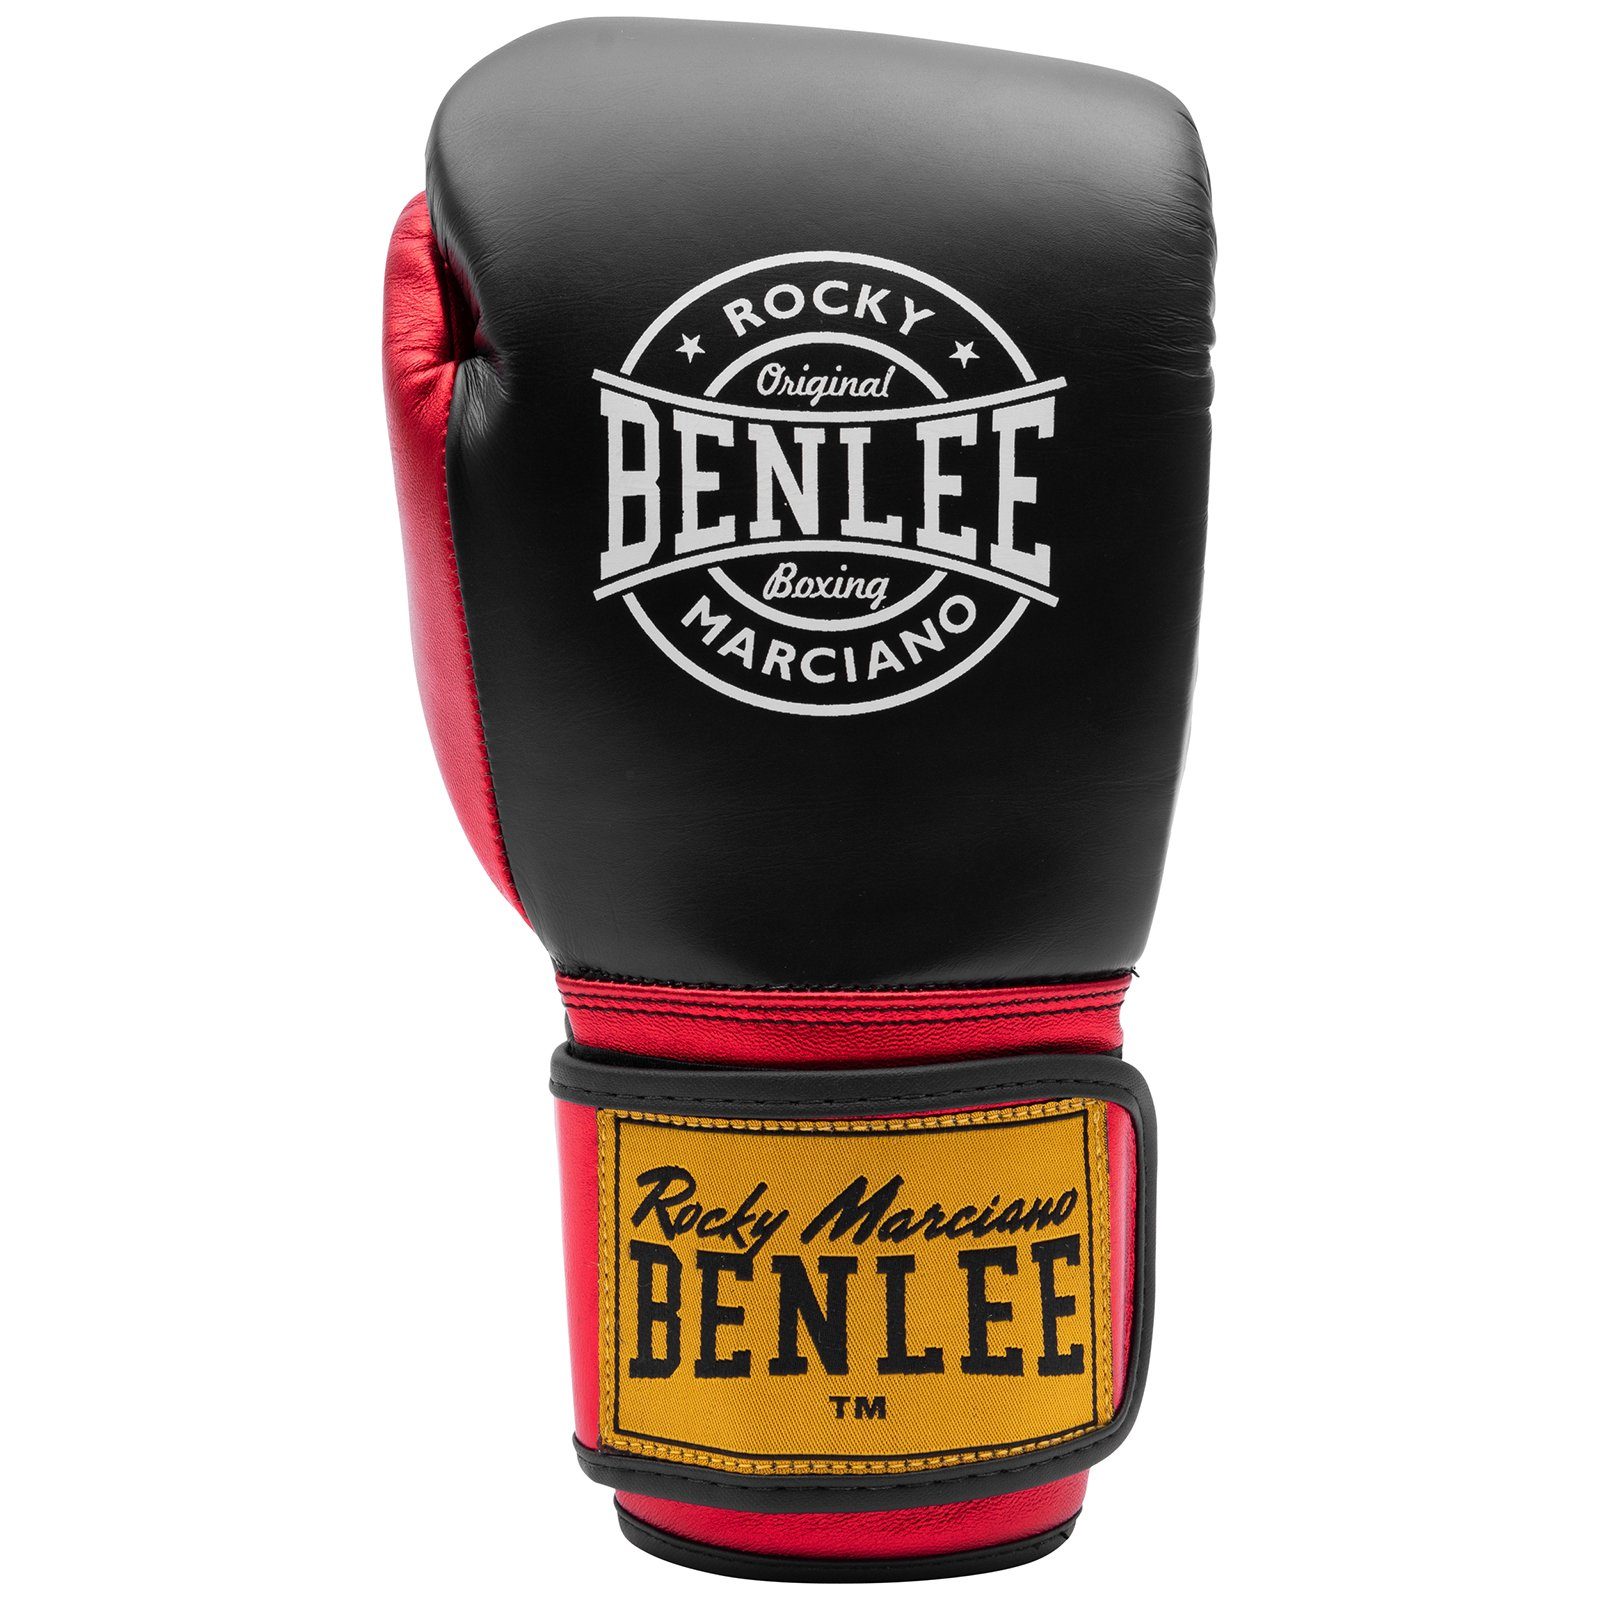 Benlee Rocky Marciano Boxhandschuhe METALSHIRE Black/Red | Boxhandschuhe